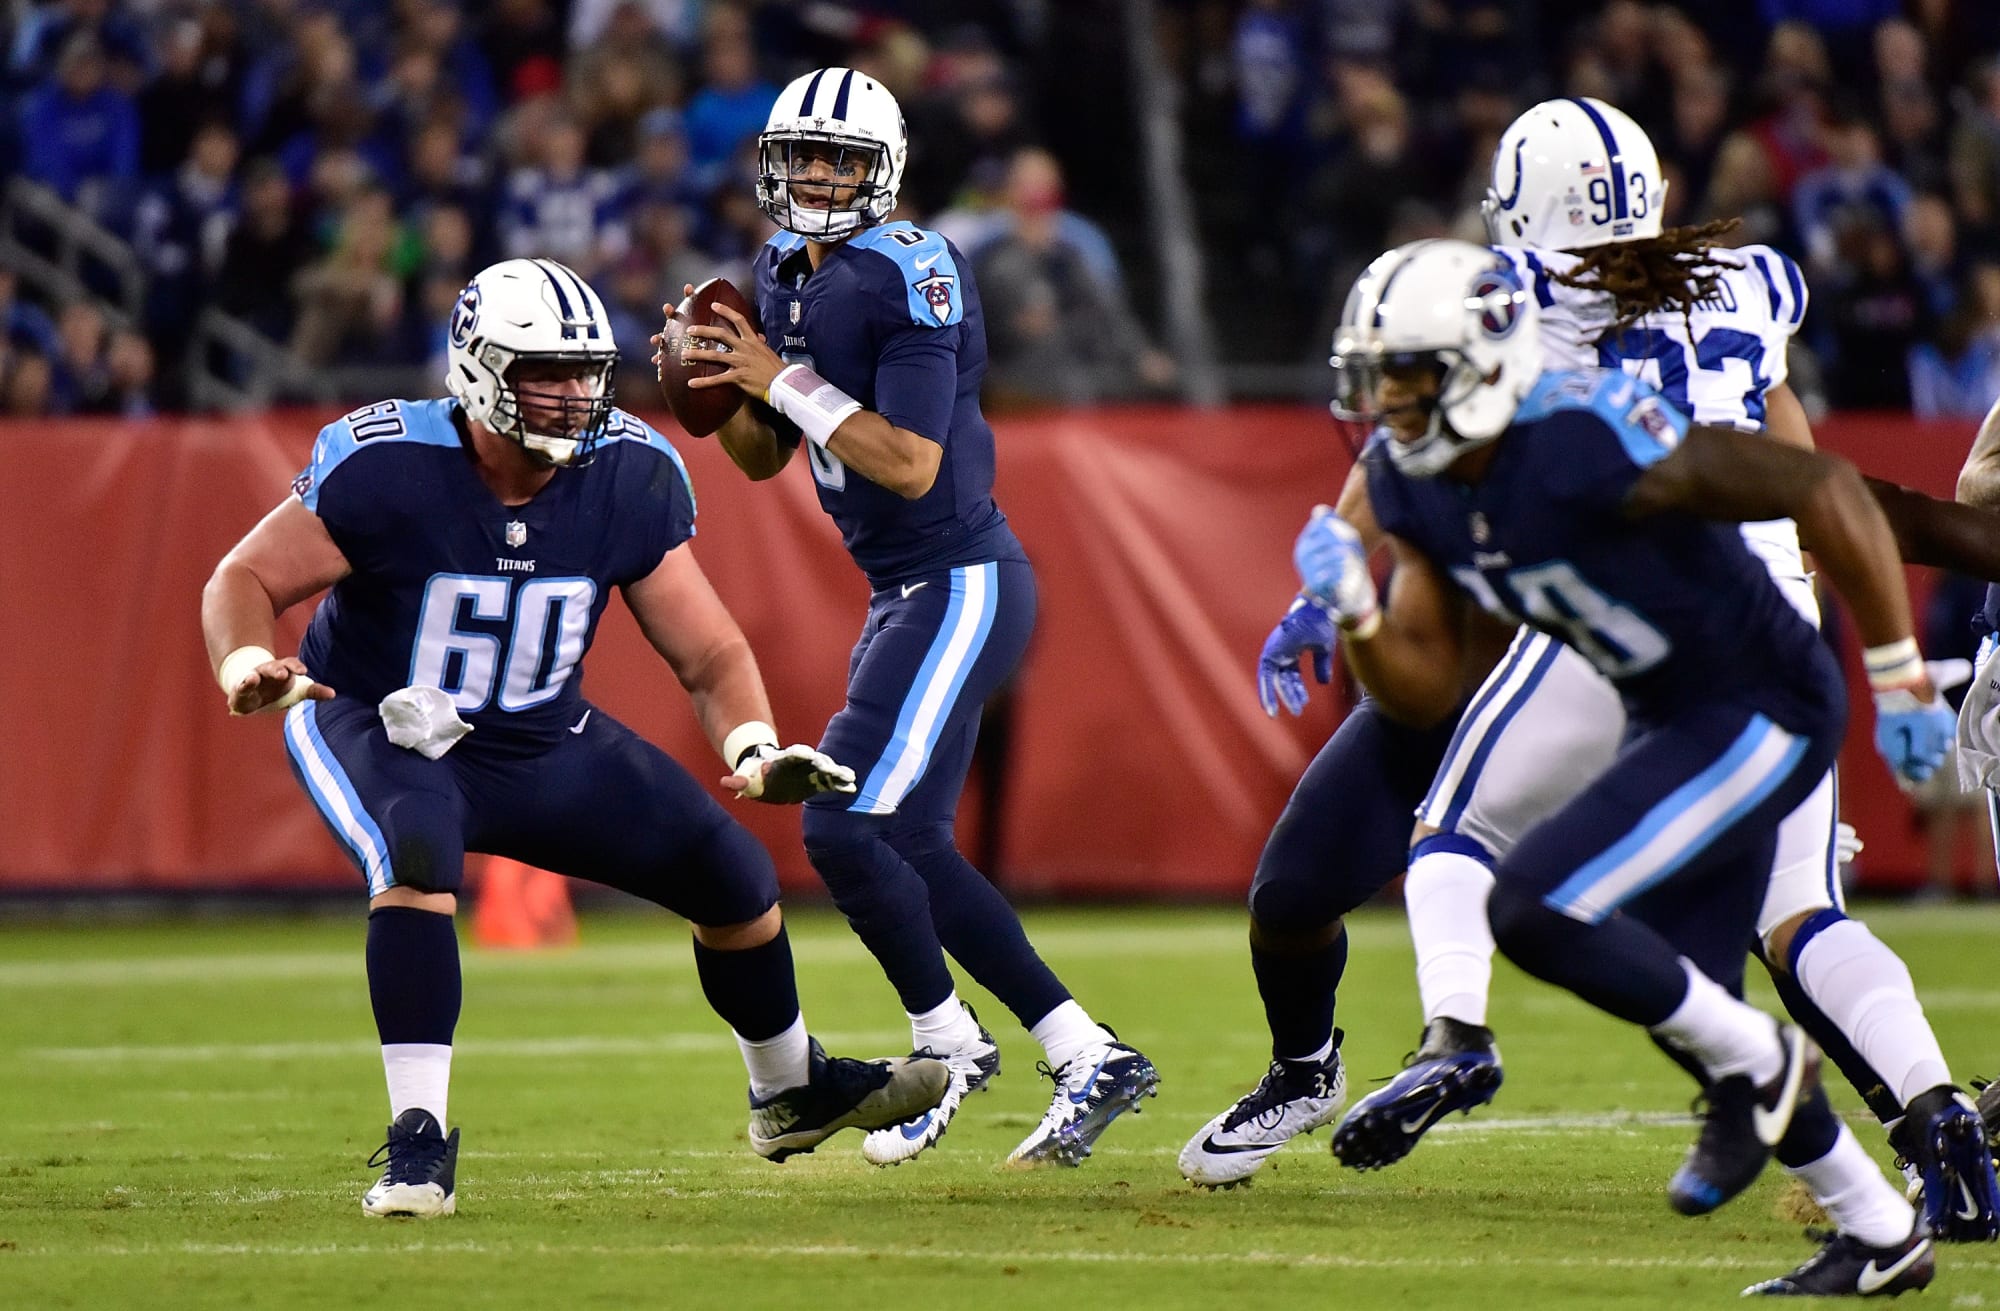 Colts vs. Titans Highlights, game tracker and more